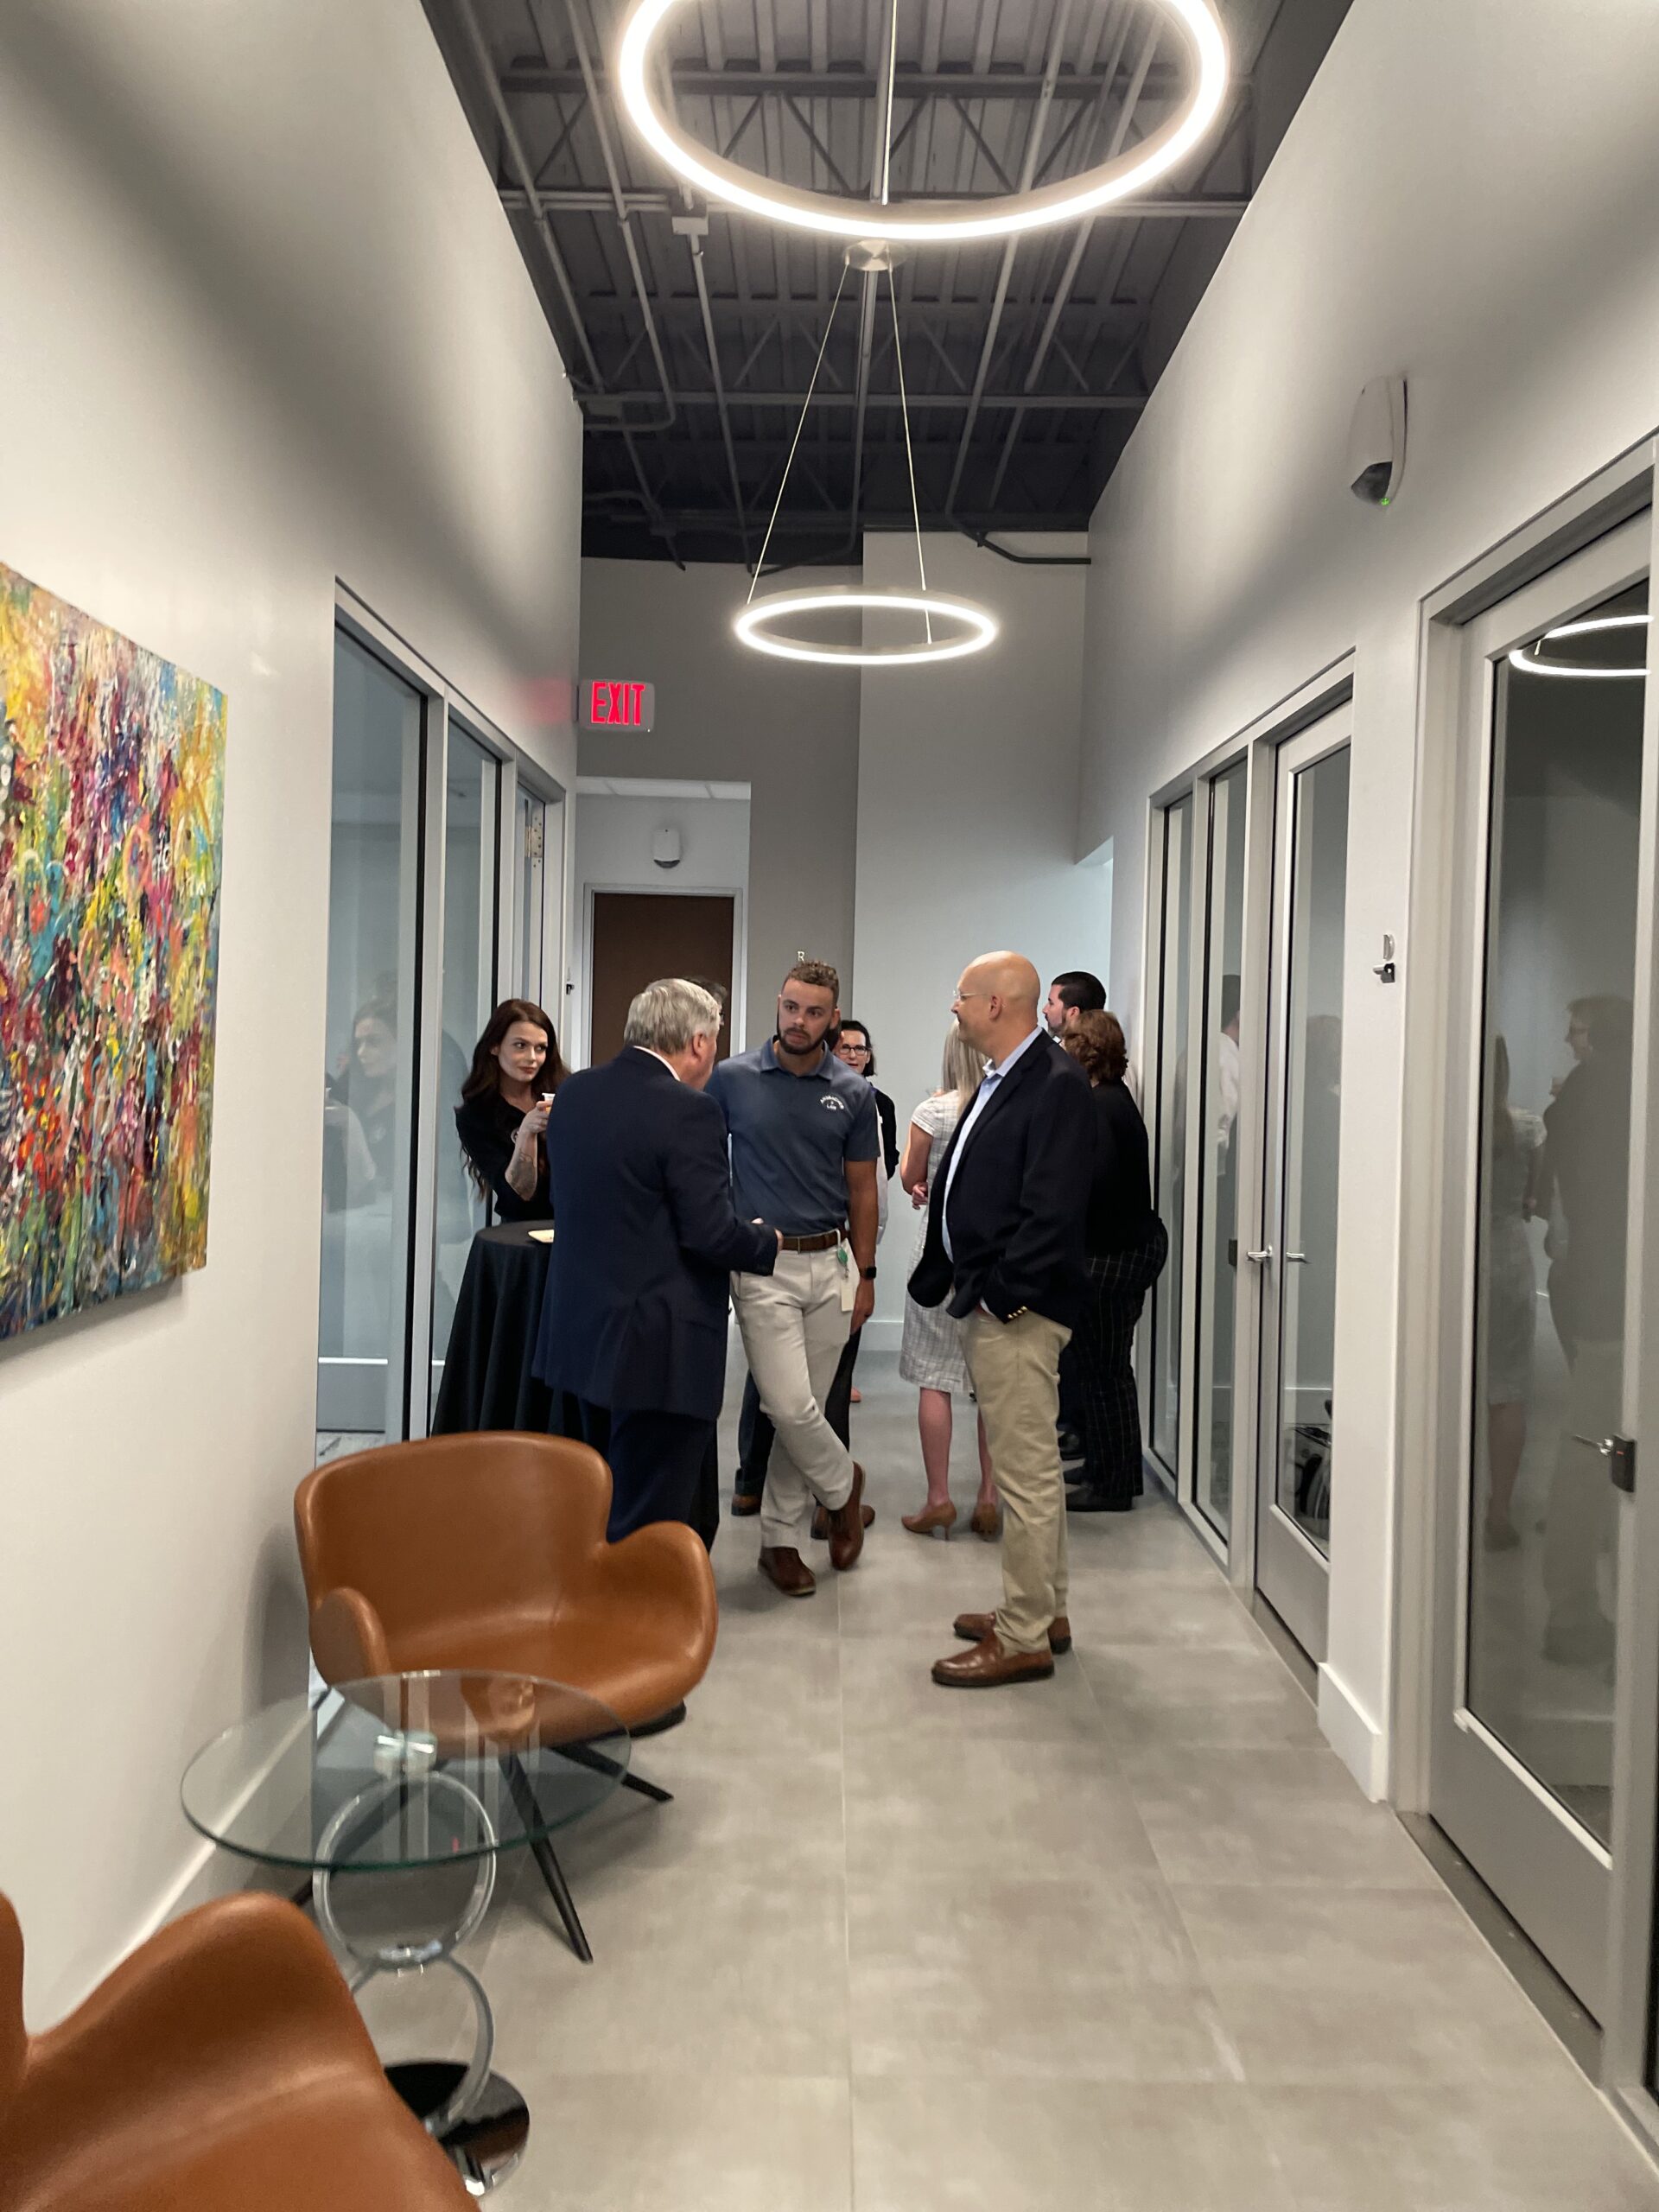 A group of professionals engaged in conversation at the grand opening of Ansbacher Law, in a modern office hallway with vibrant paintings on the wall and stylish circular lighting overhead.